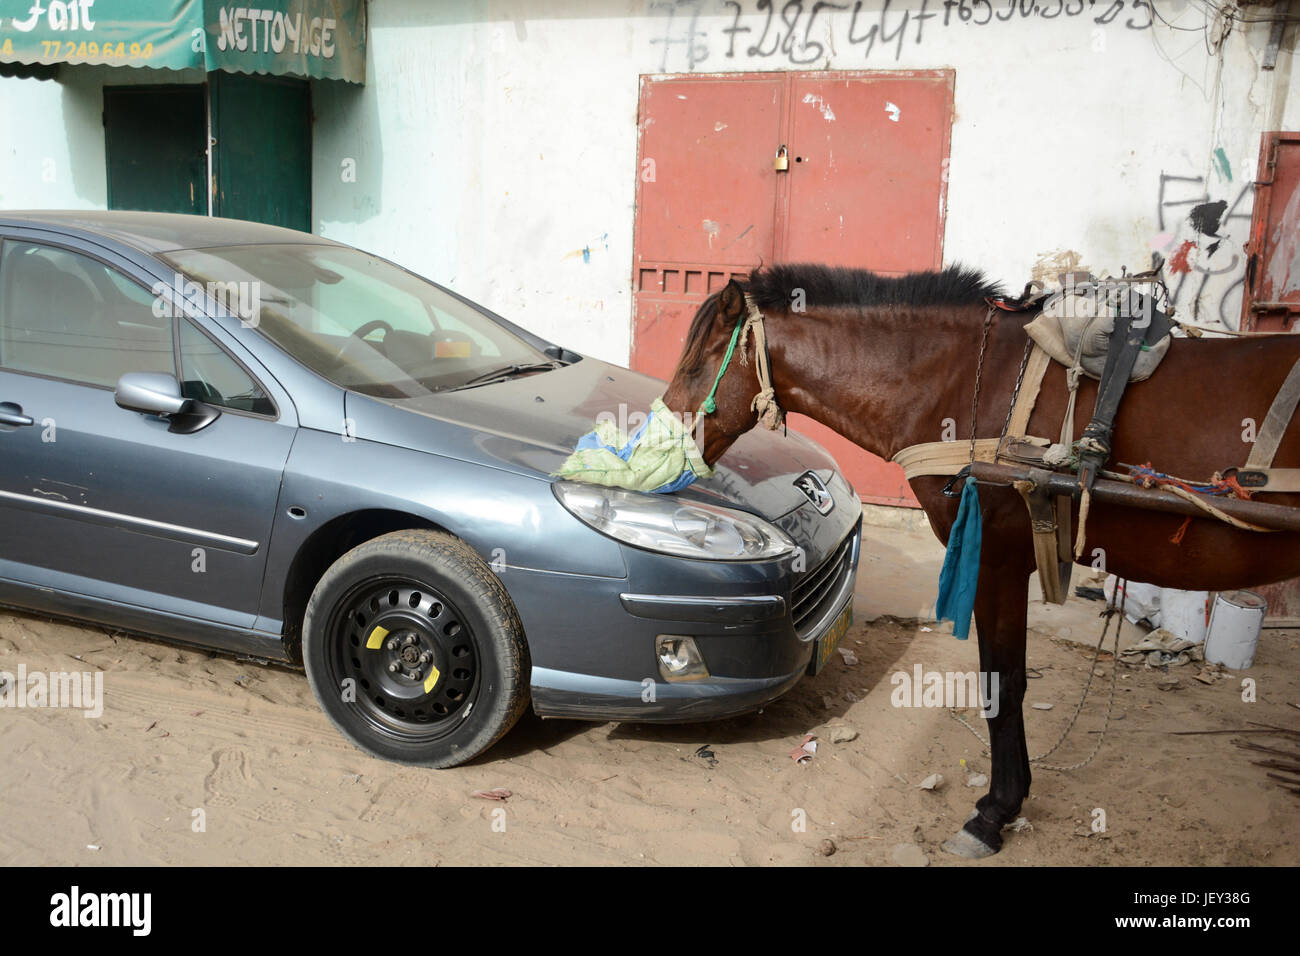 Horse eating from the feed bag in Yoff, Dakar, Senegal. Stock Photo